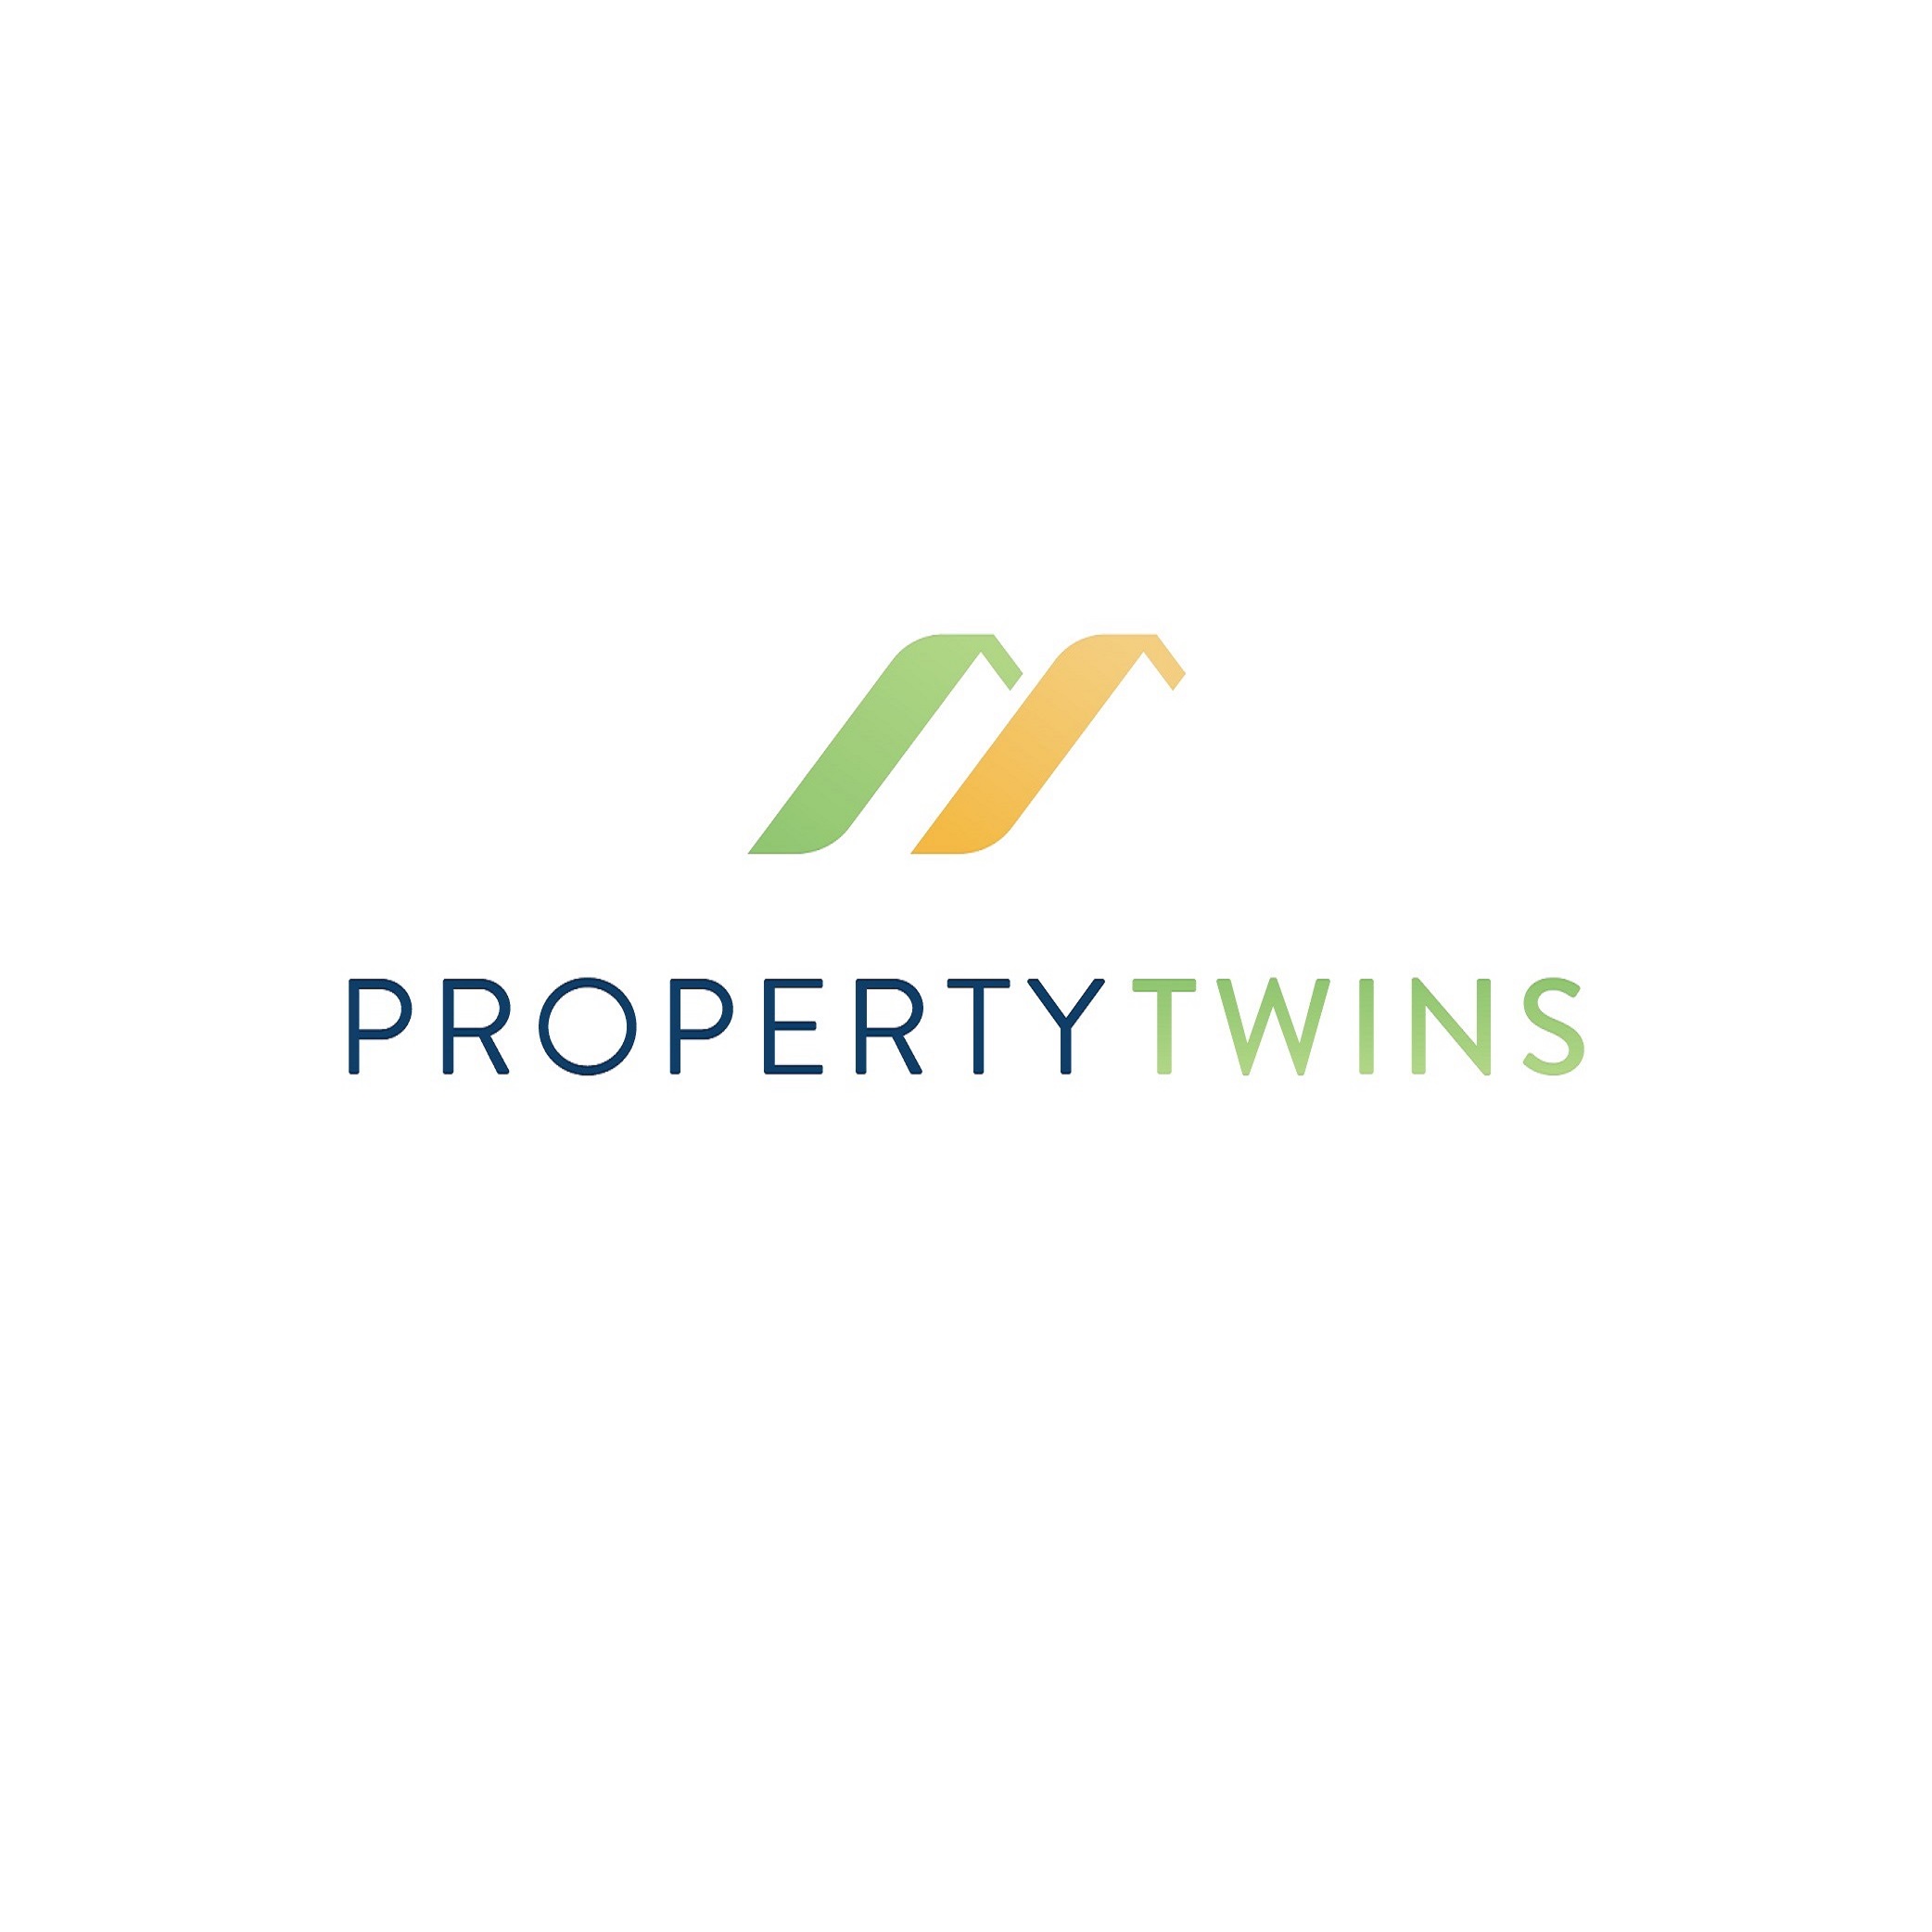 Business logo of Property Twins